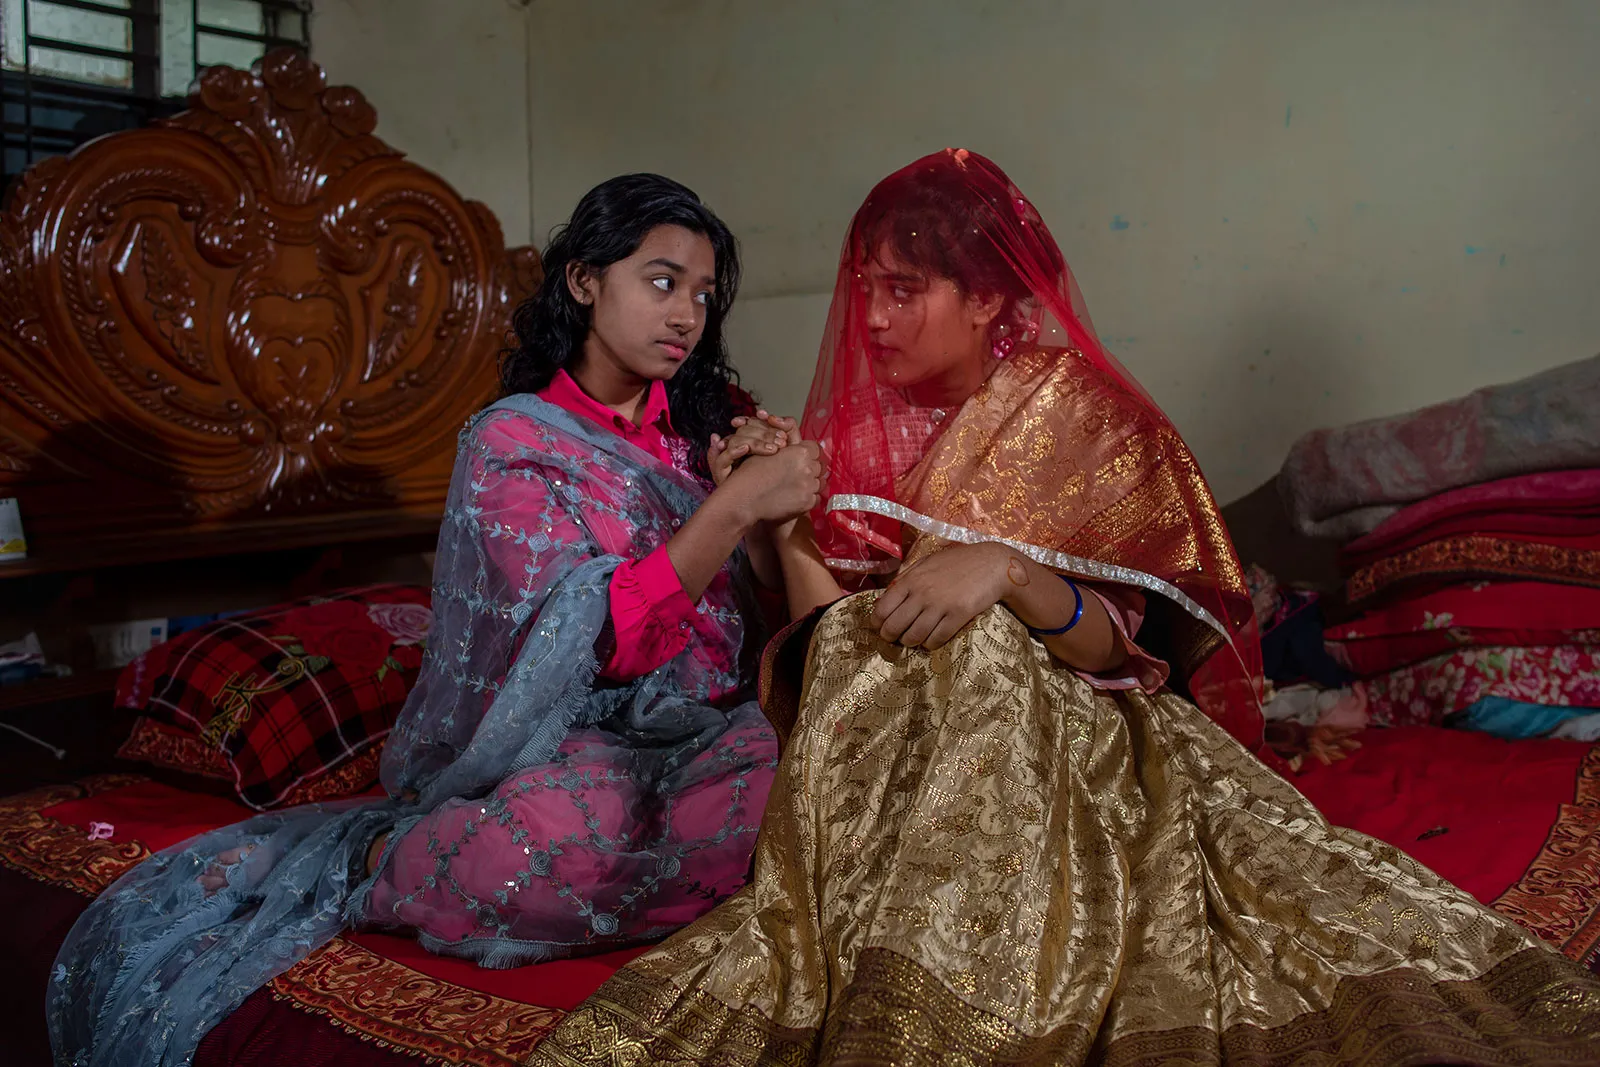 Two teenage Bangladeshi girls sit on a bed with a bright red quilt and clasp hands while facing each other. One of the girls is wearing a red veiled head covering.